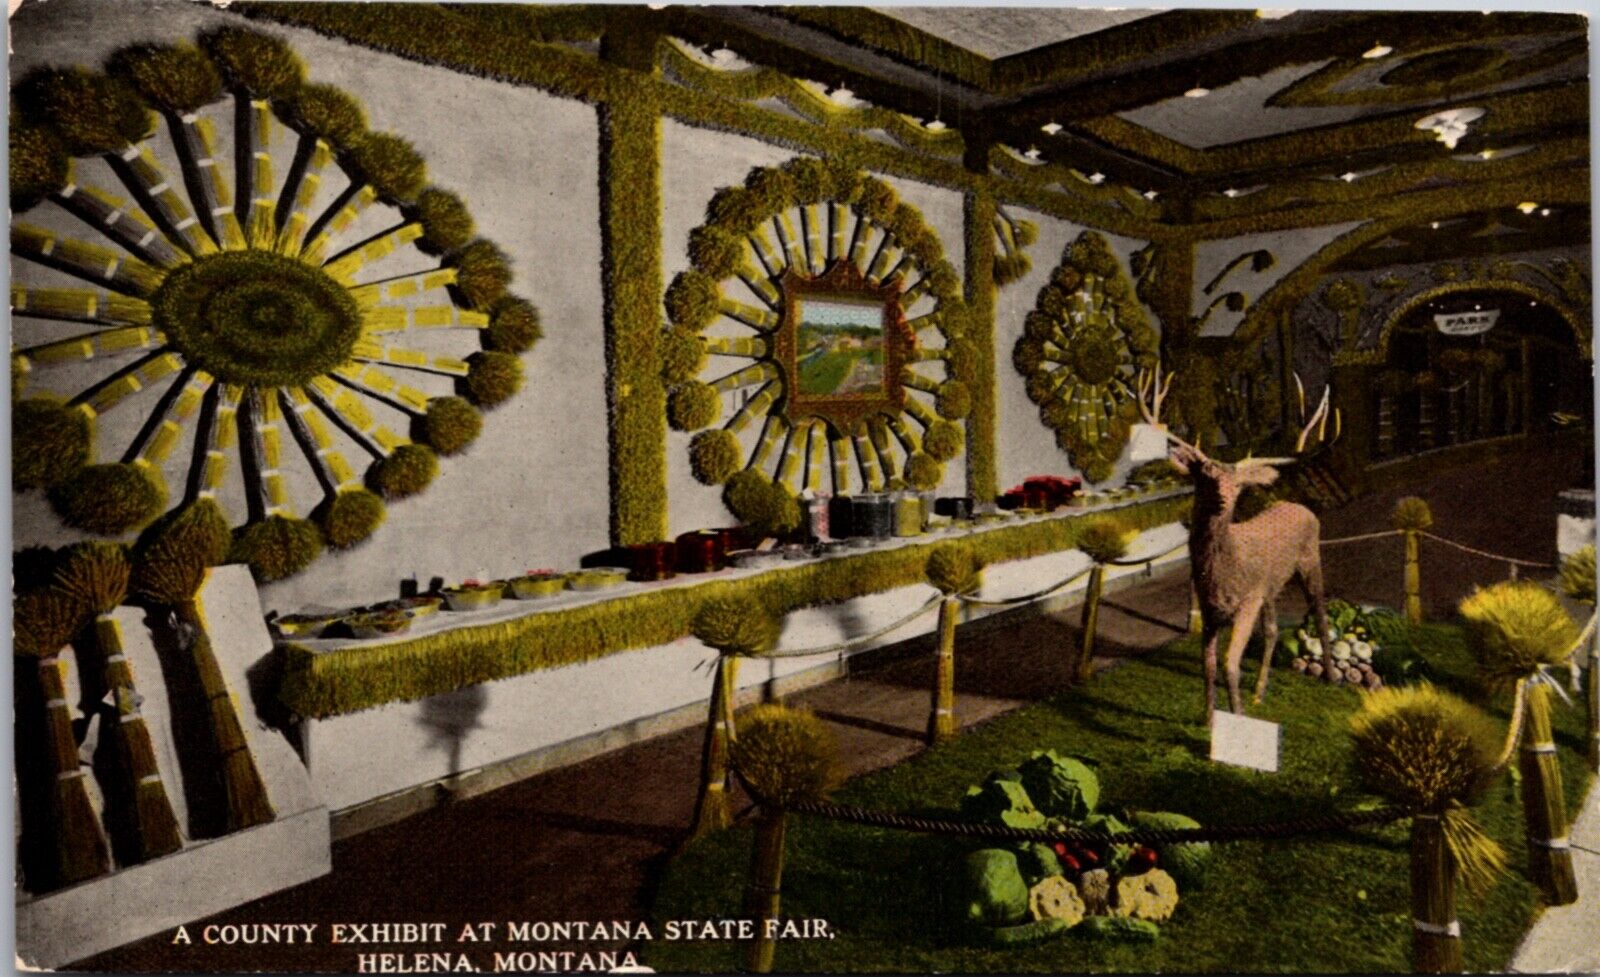 Postcard A County Exhibit at Montana State Fair in Helena, Montana